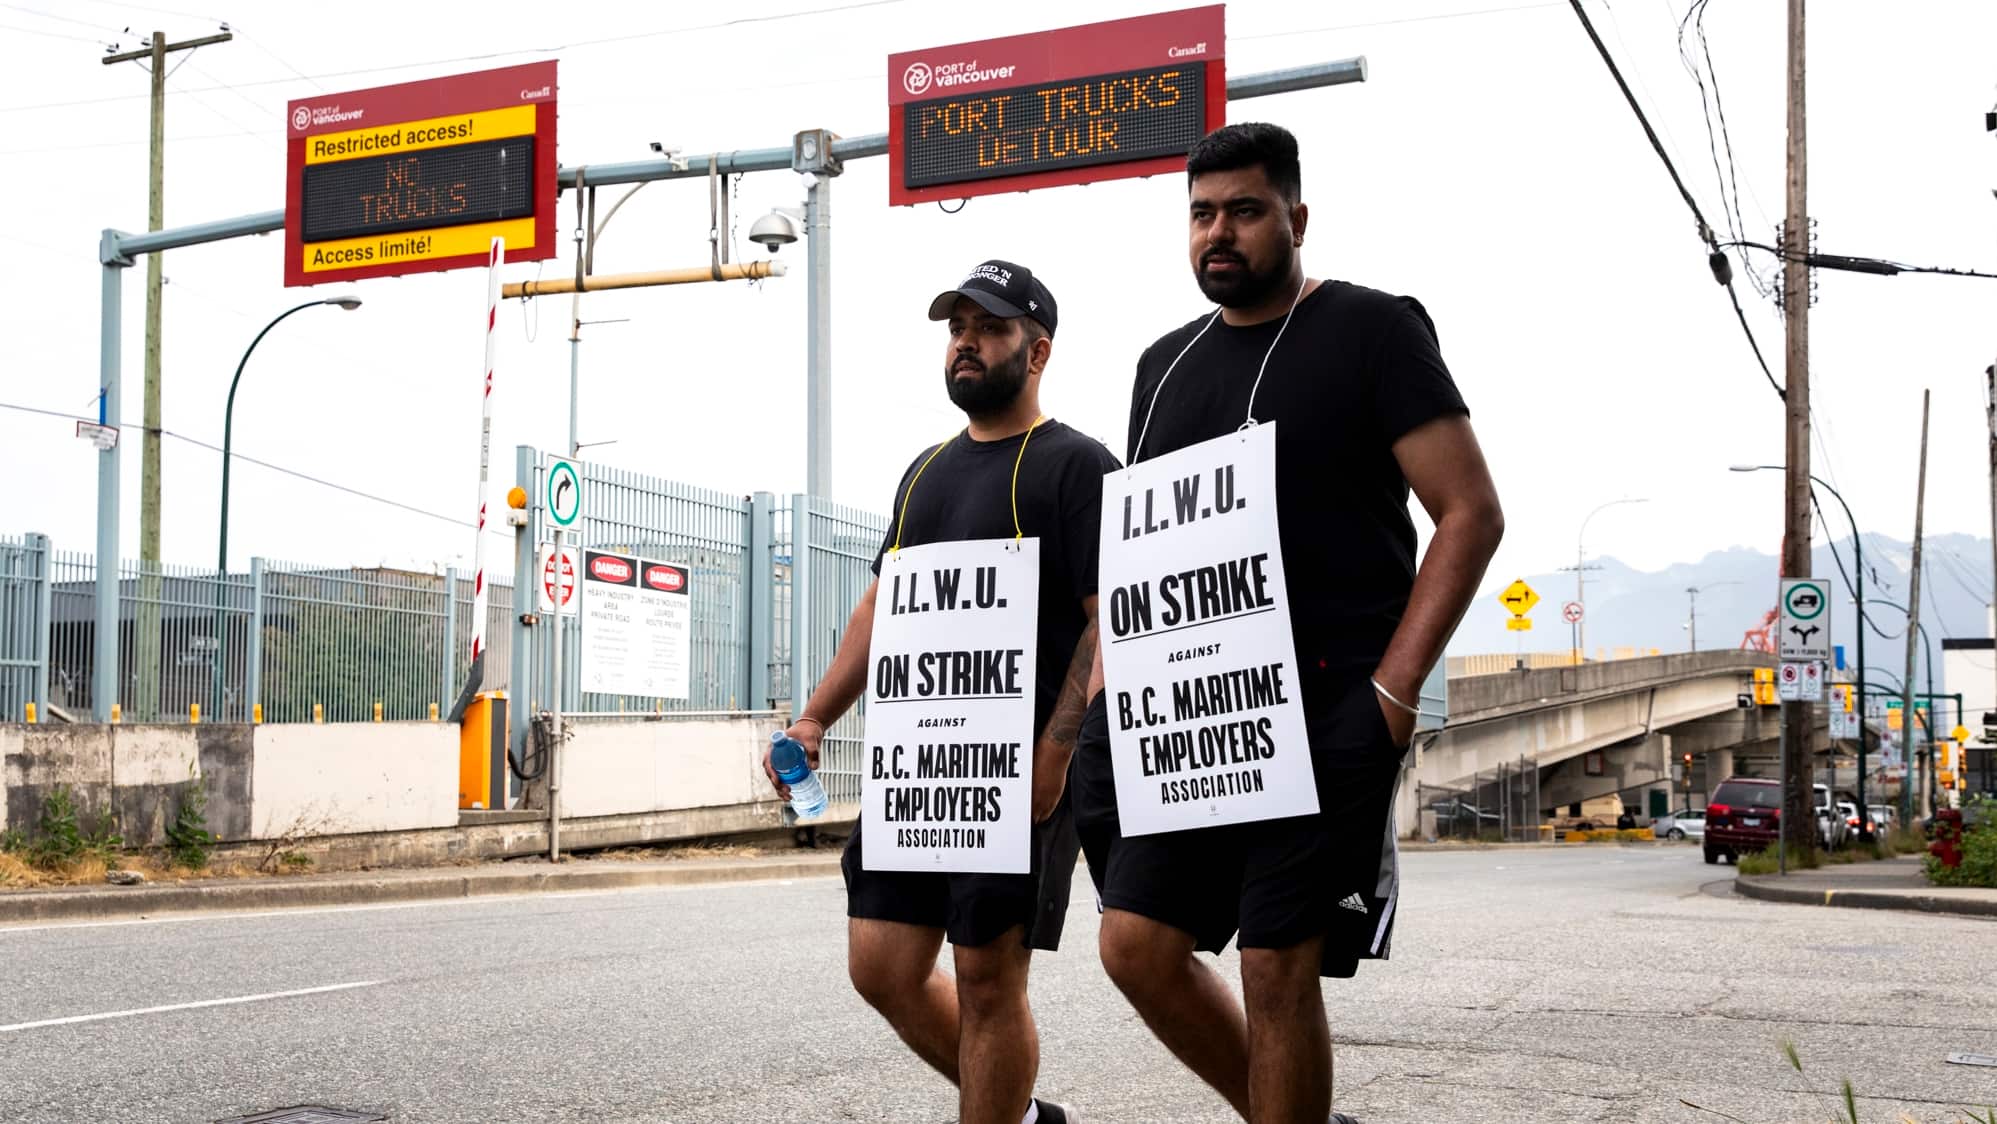 b c port workers resume strike after union rejects tentative deal